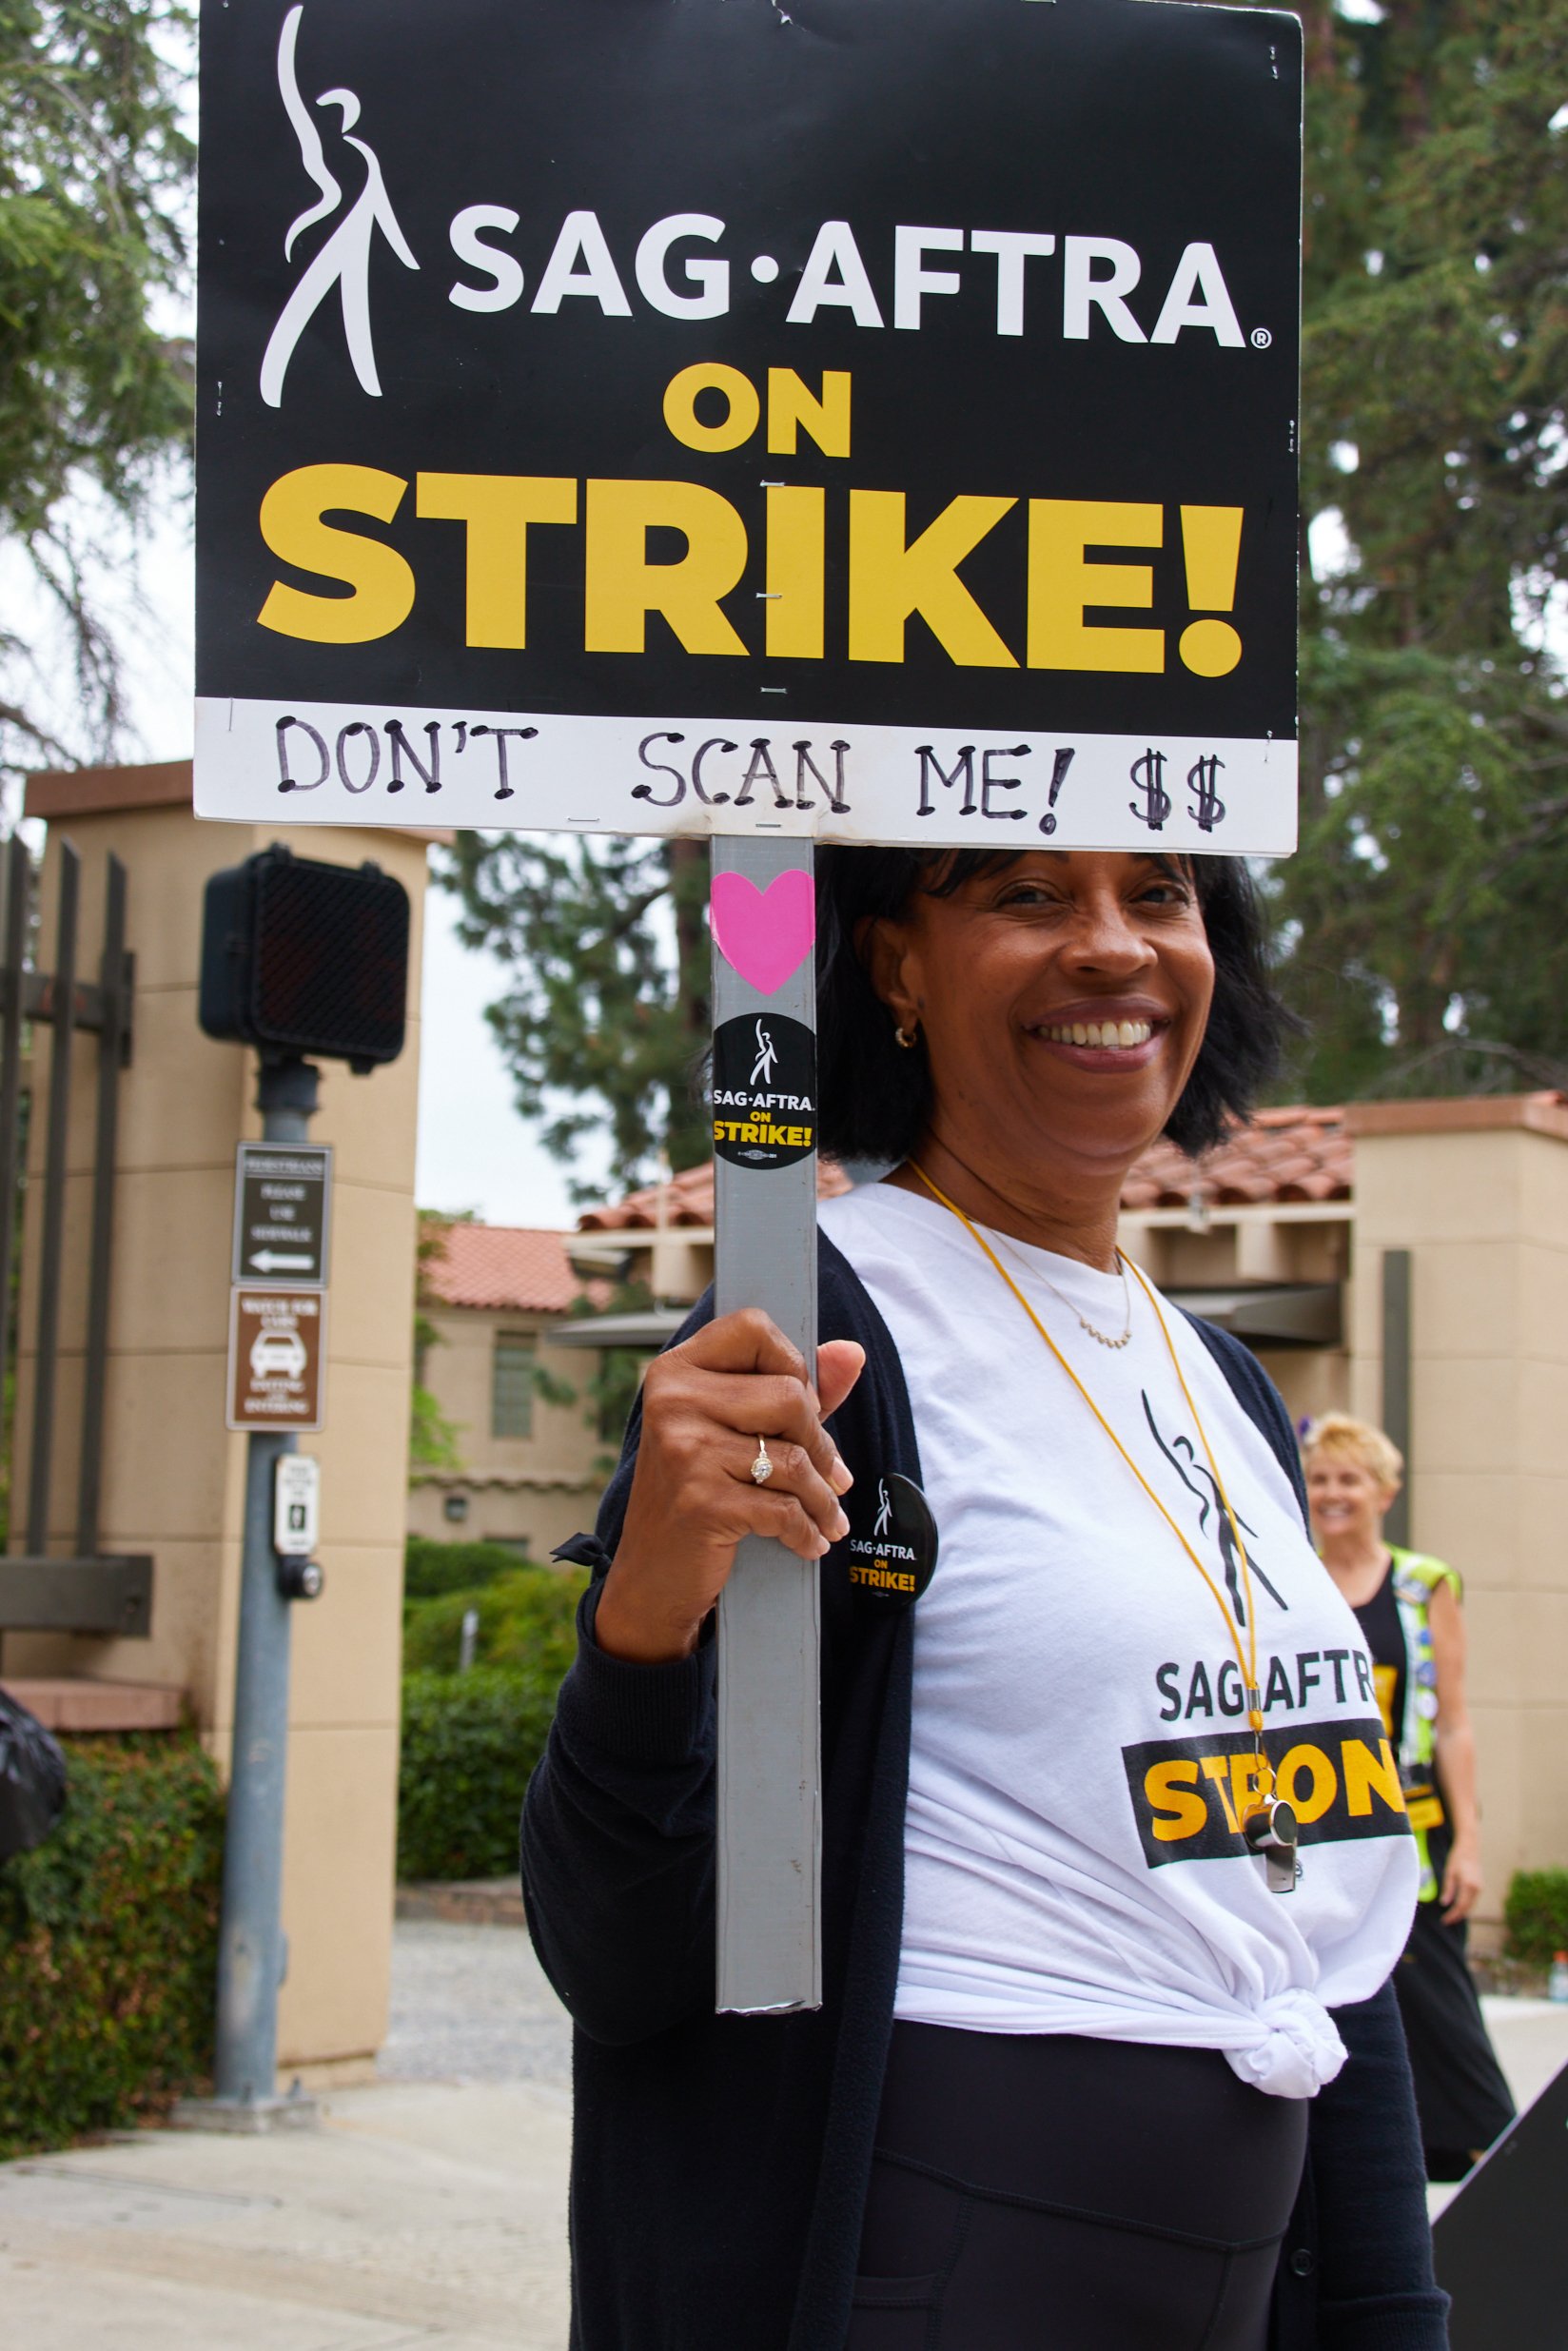  Actress and SAG-AFTRA member Melvina Strikes poses with a picket sign with "DON'T SCAN ME! $$" written on it during the SAG-AFTRA strikes in front of Warner Bros. Studios, Burbank, Calif., on Sept 29, 2023. She had played a background character in t